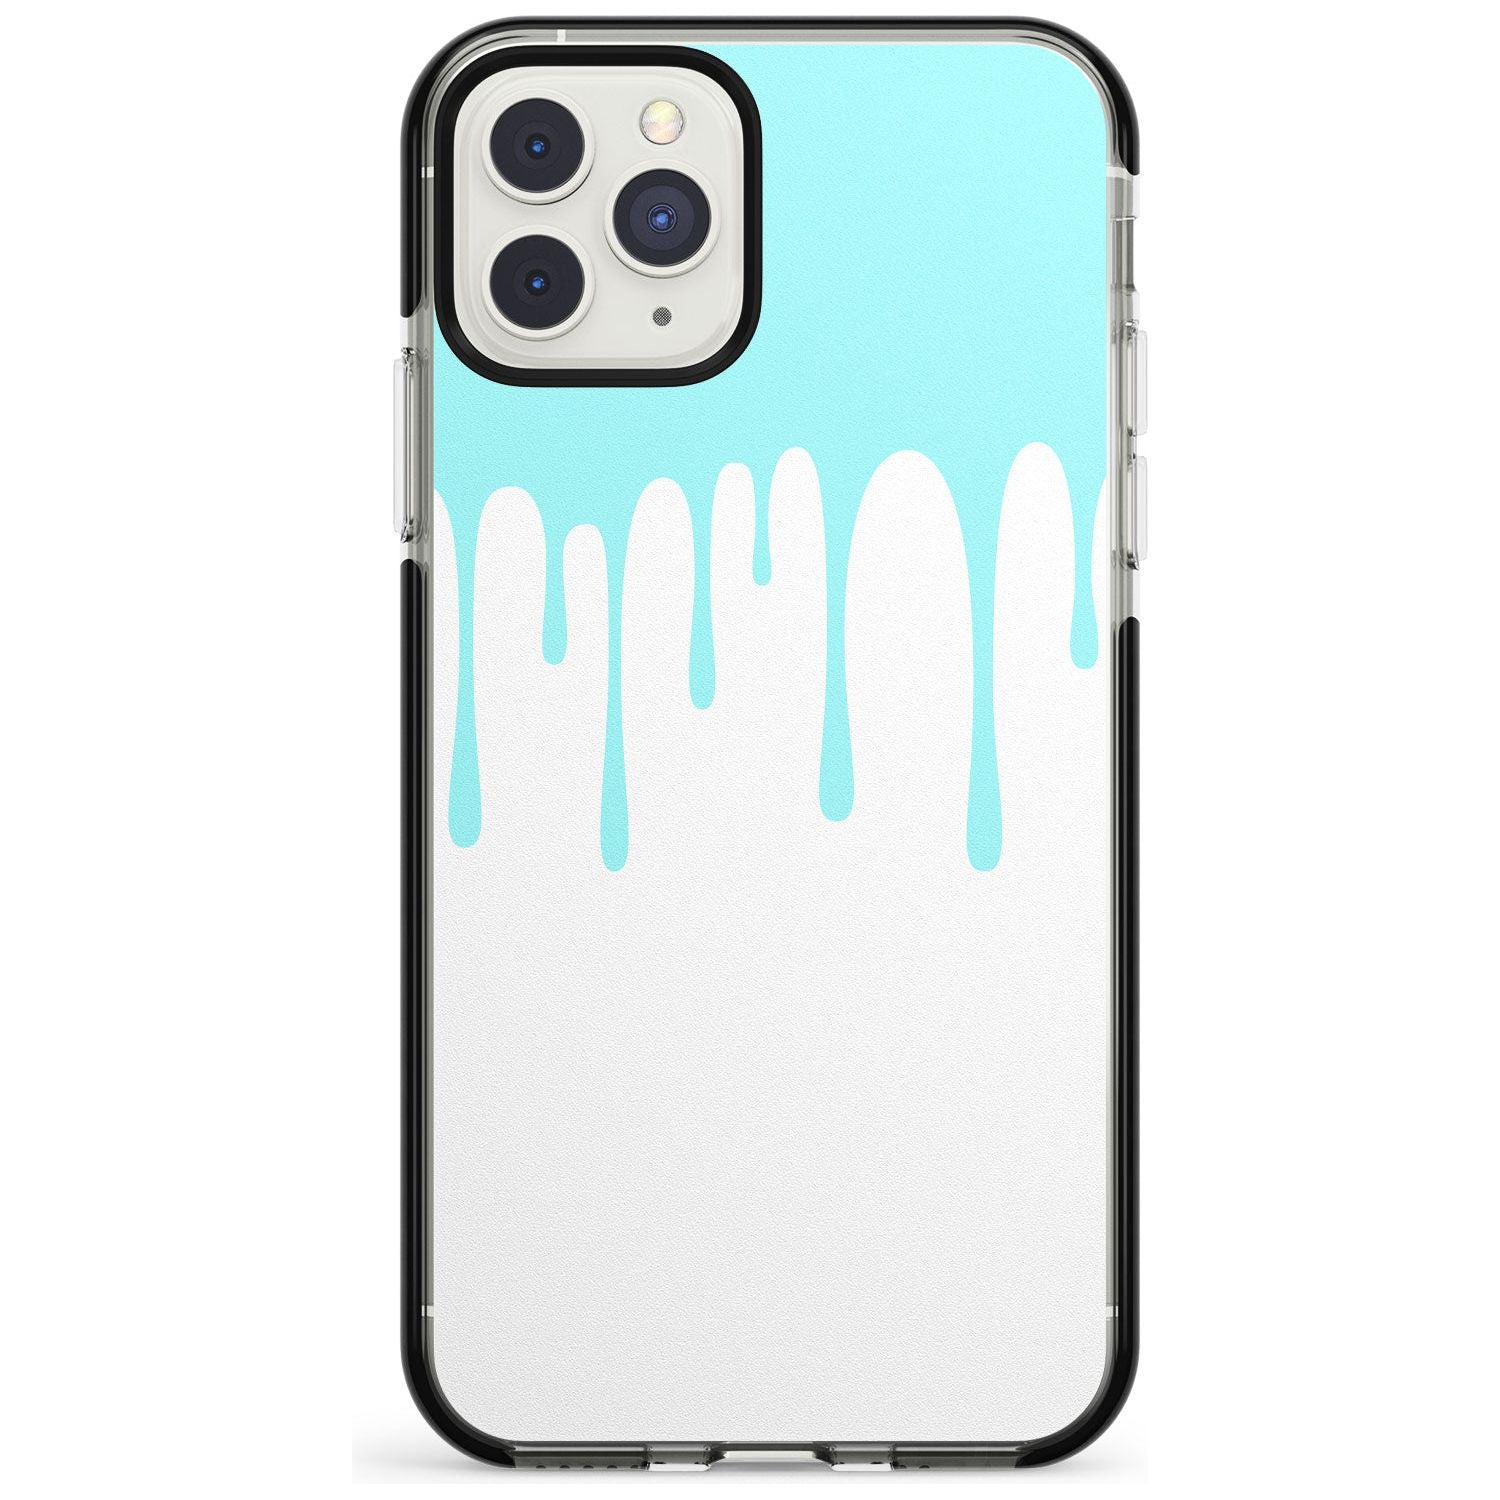 Melted Effect: Teal & White iPhone Case Black Impact Phone Case Warehouse 11 Pro Max